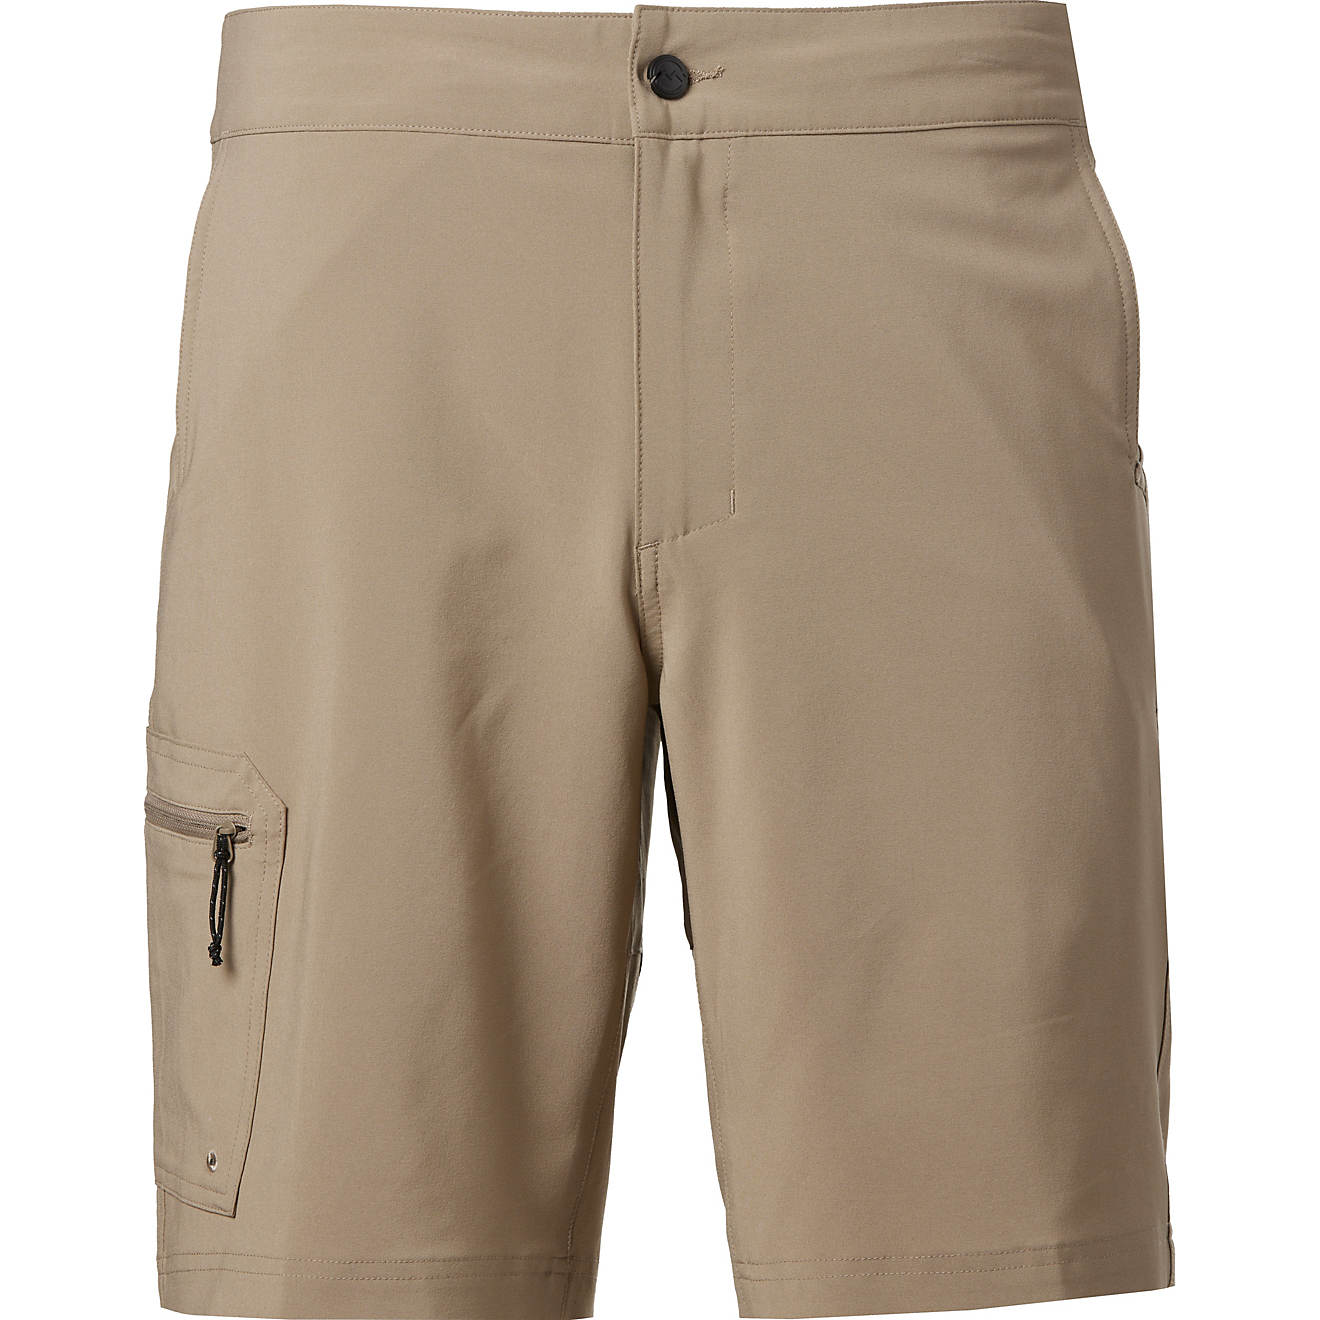 Magellan Outdoors Men's FishGear Overcast Hybrid Shorts 10 in                                                                    - view number 1